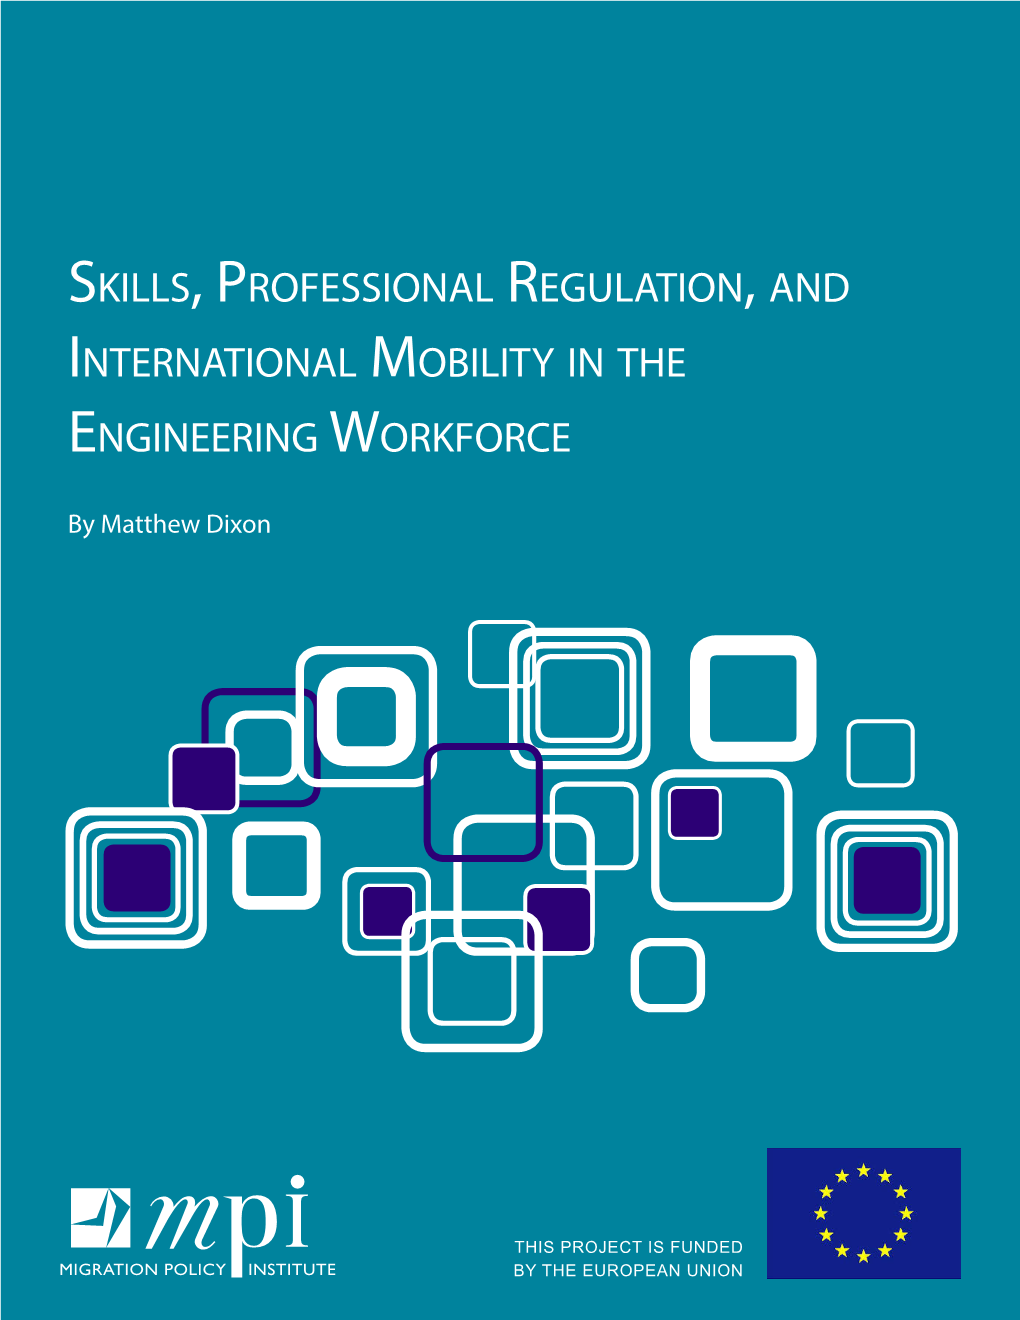 Skills, Professional Regulation, and International Mobility in the Engineering Workforce